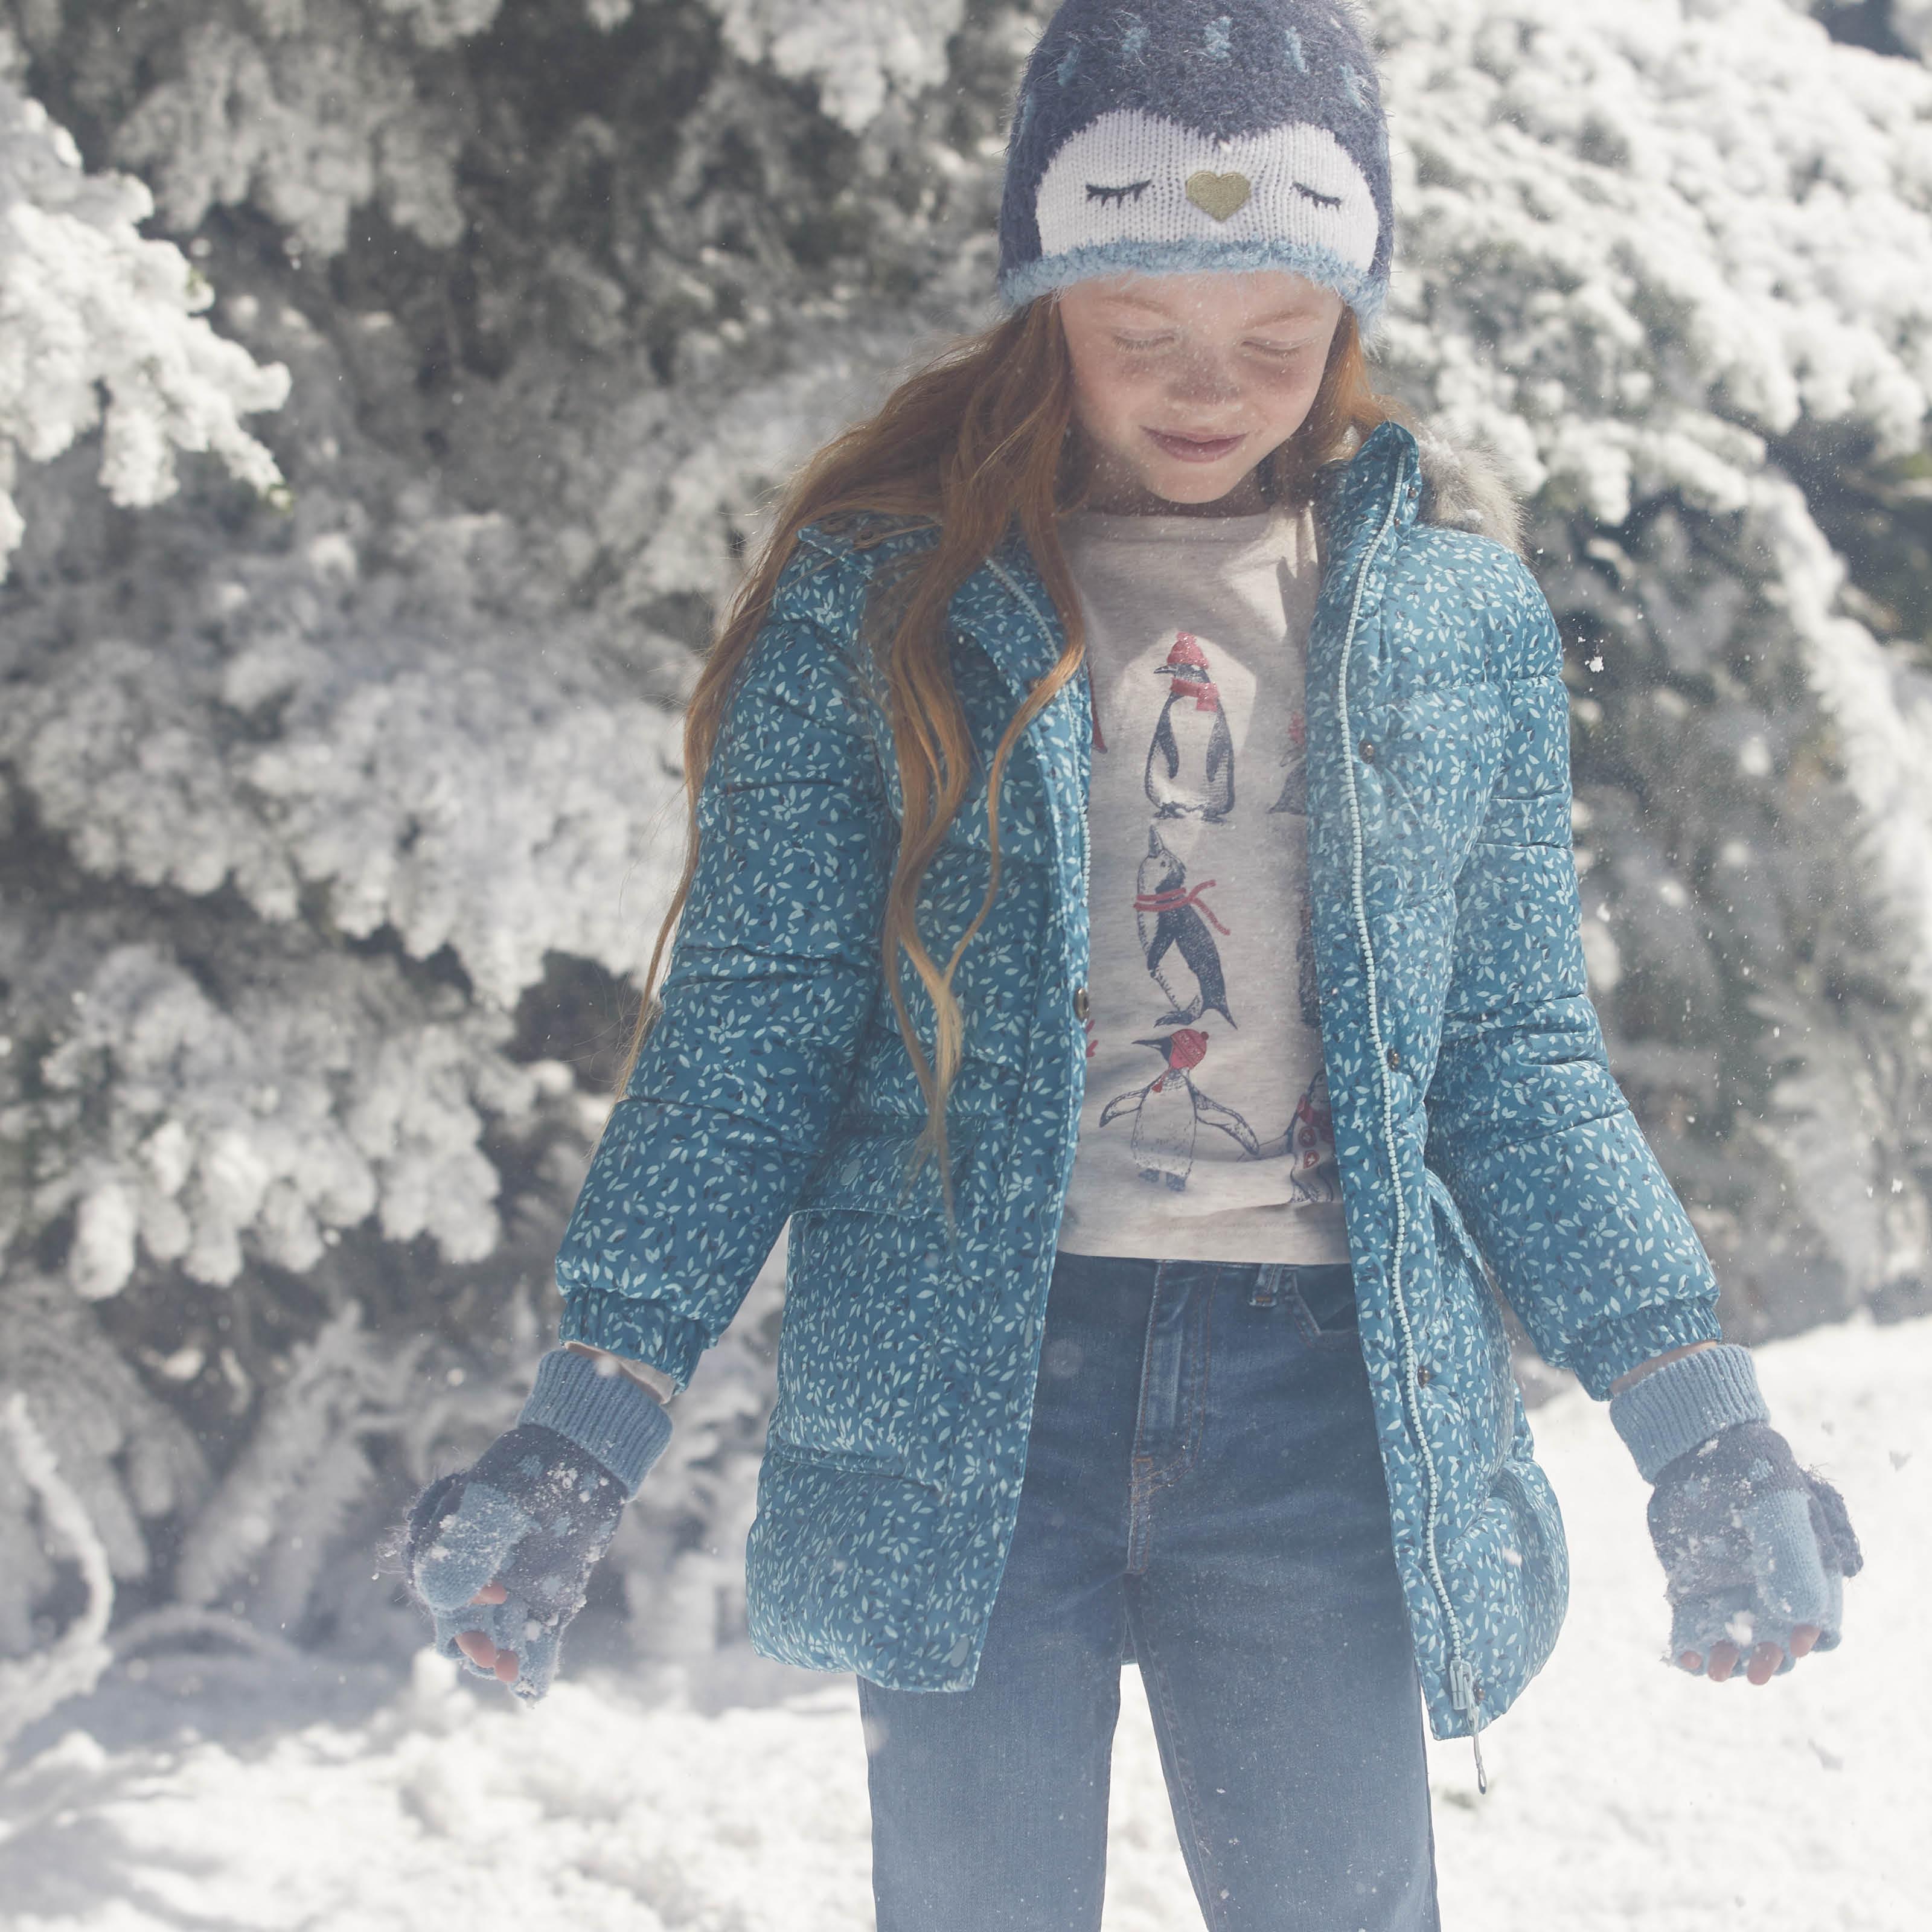 A girl wearing a penguin character beanie hat & matching gloves, & a bright blue patterned coat over a T-shirt & blue jeans.